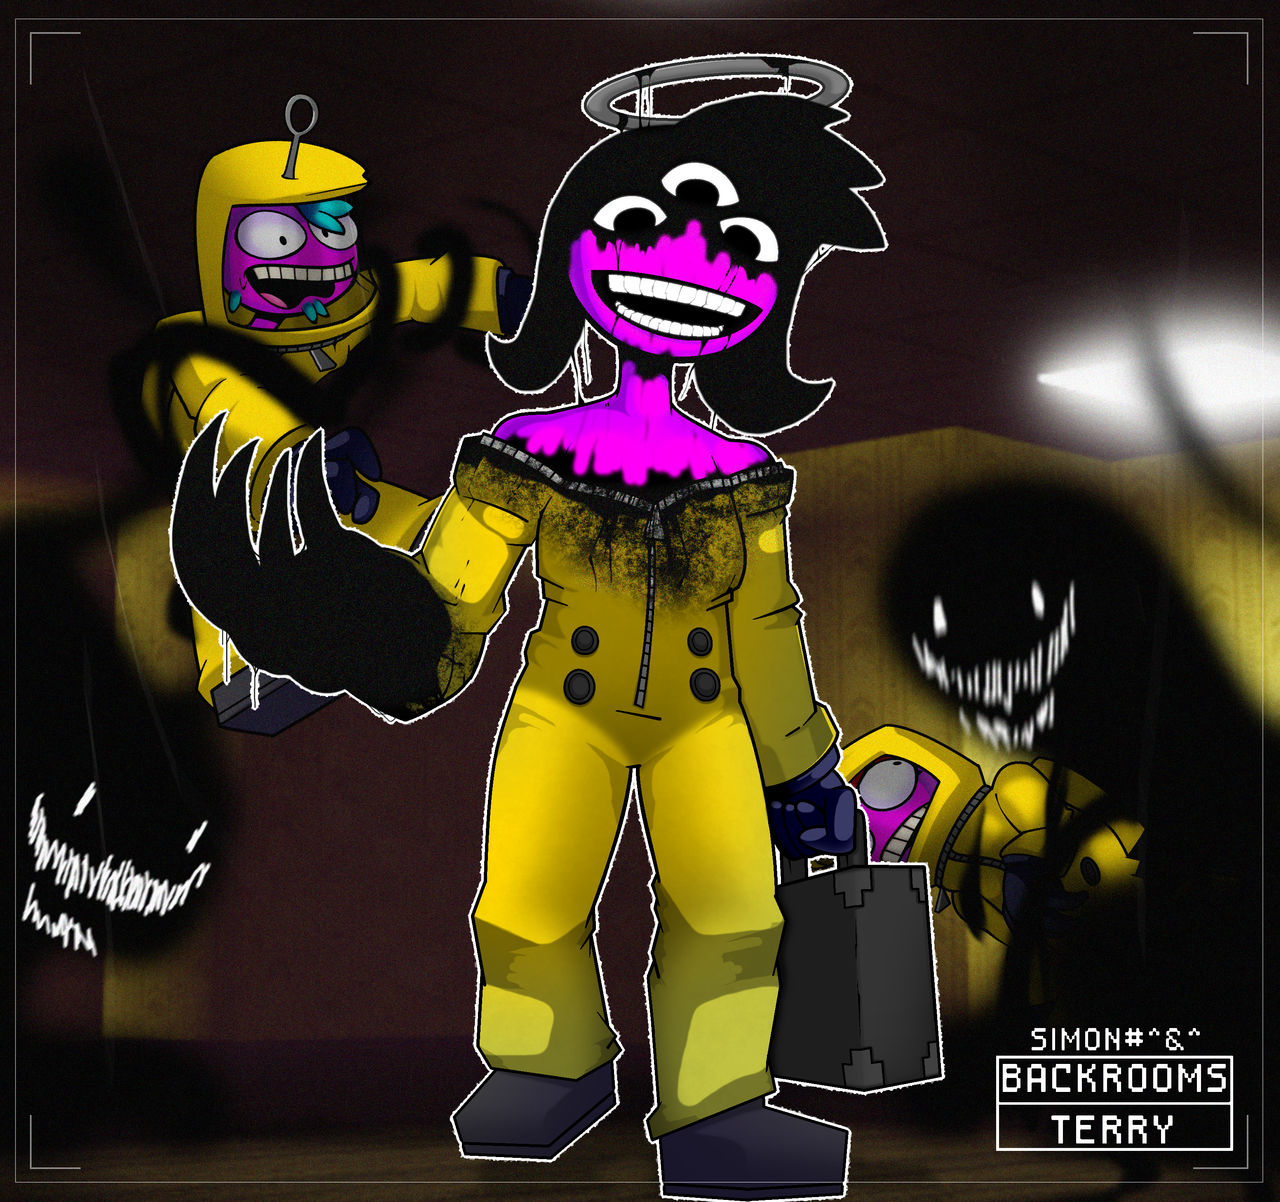 The Backrooms Movie Confirmed! by beny2000 on DeviantArt